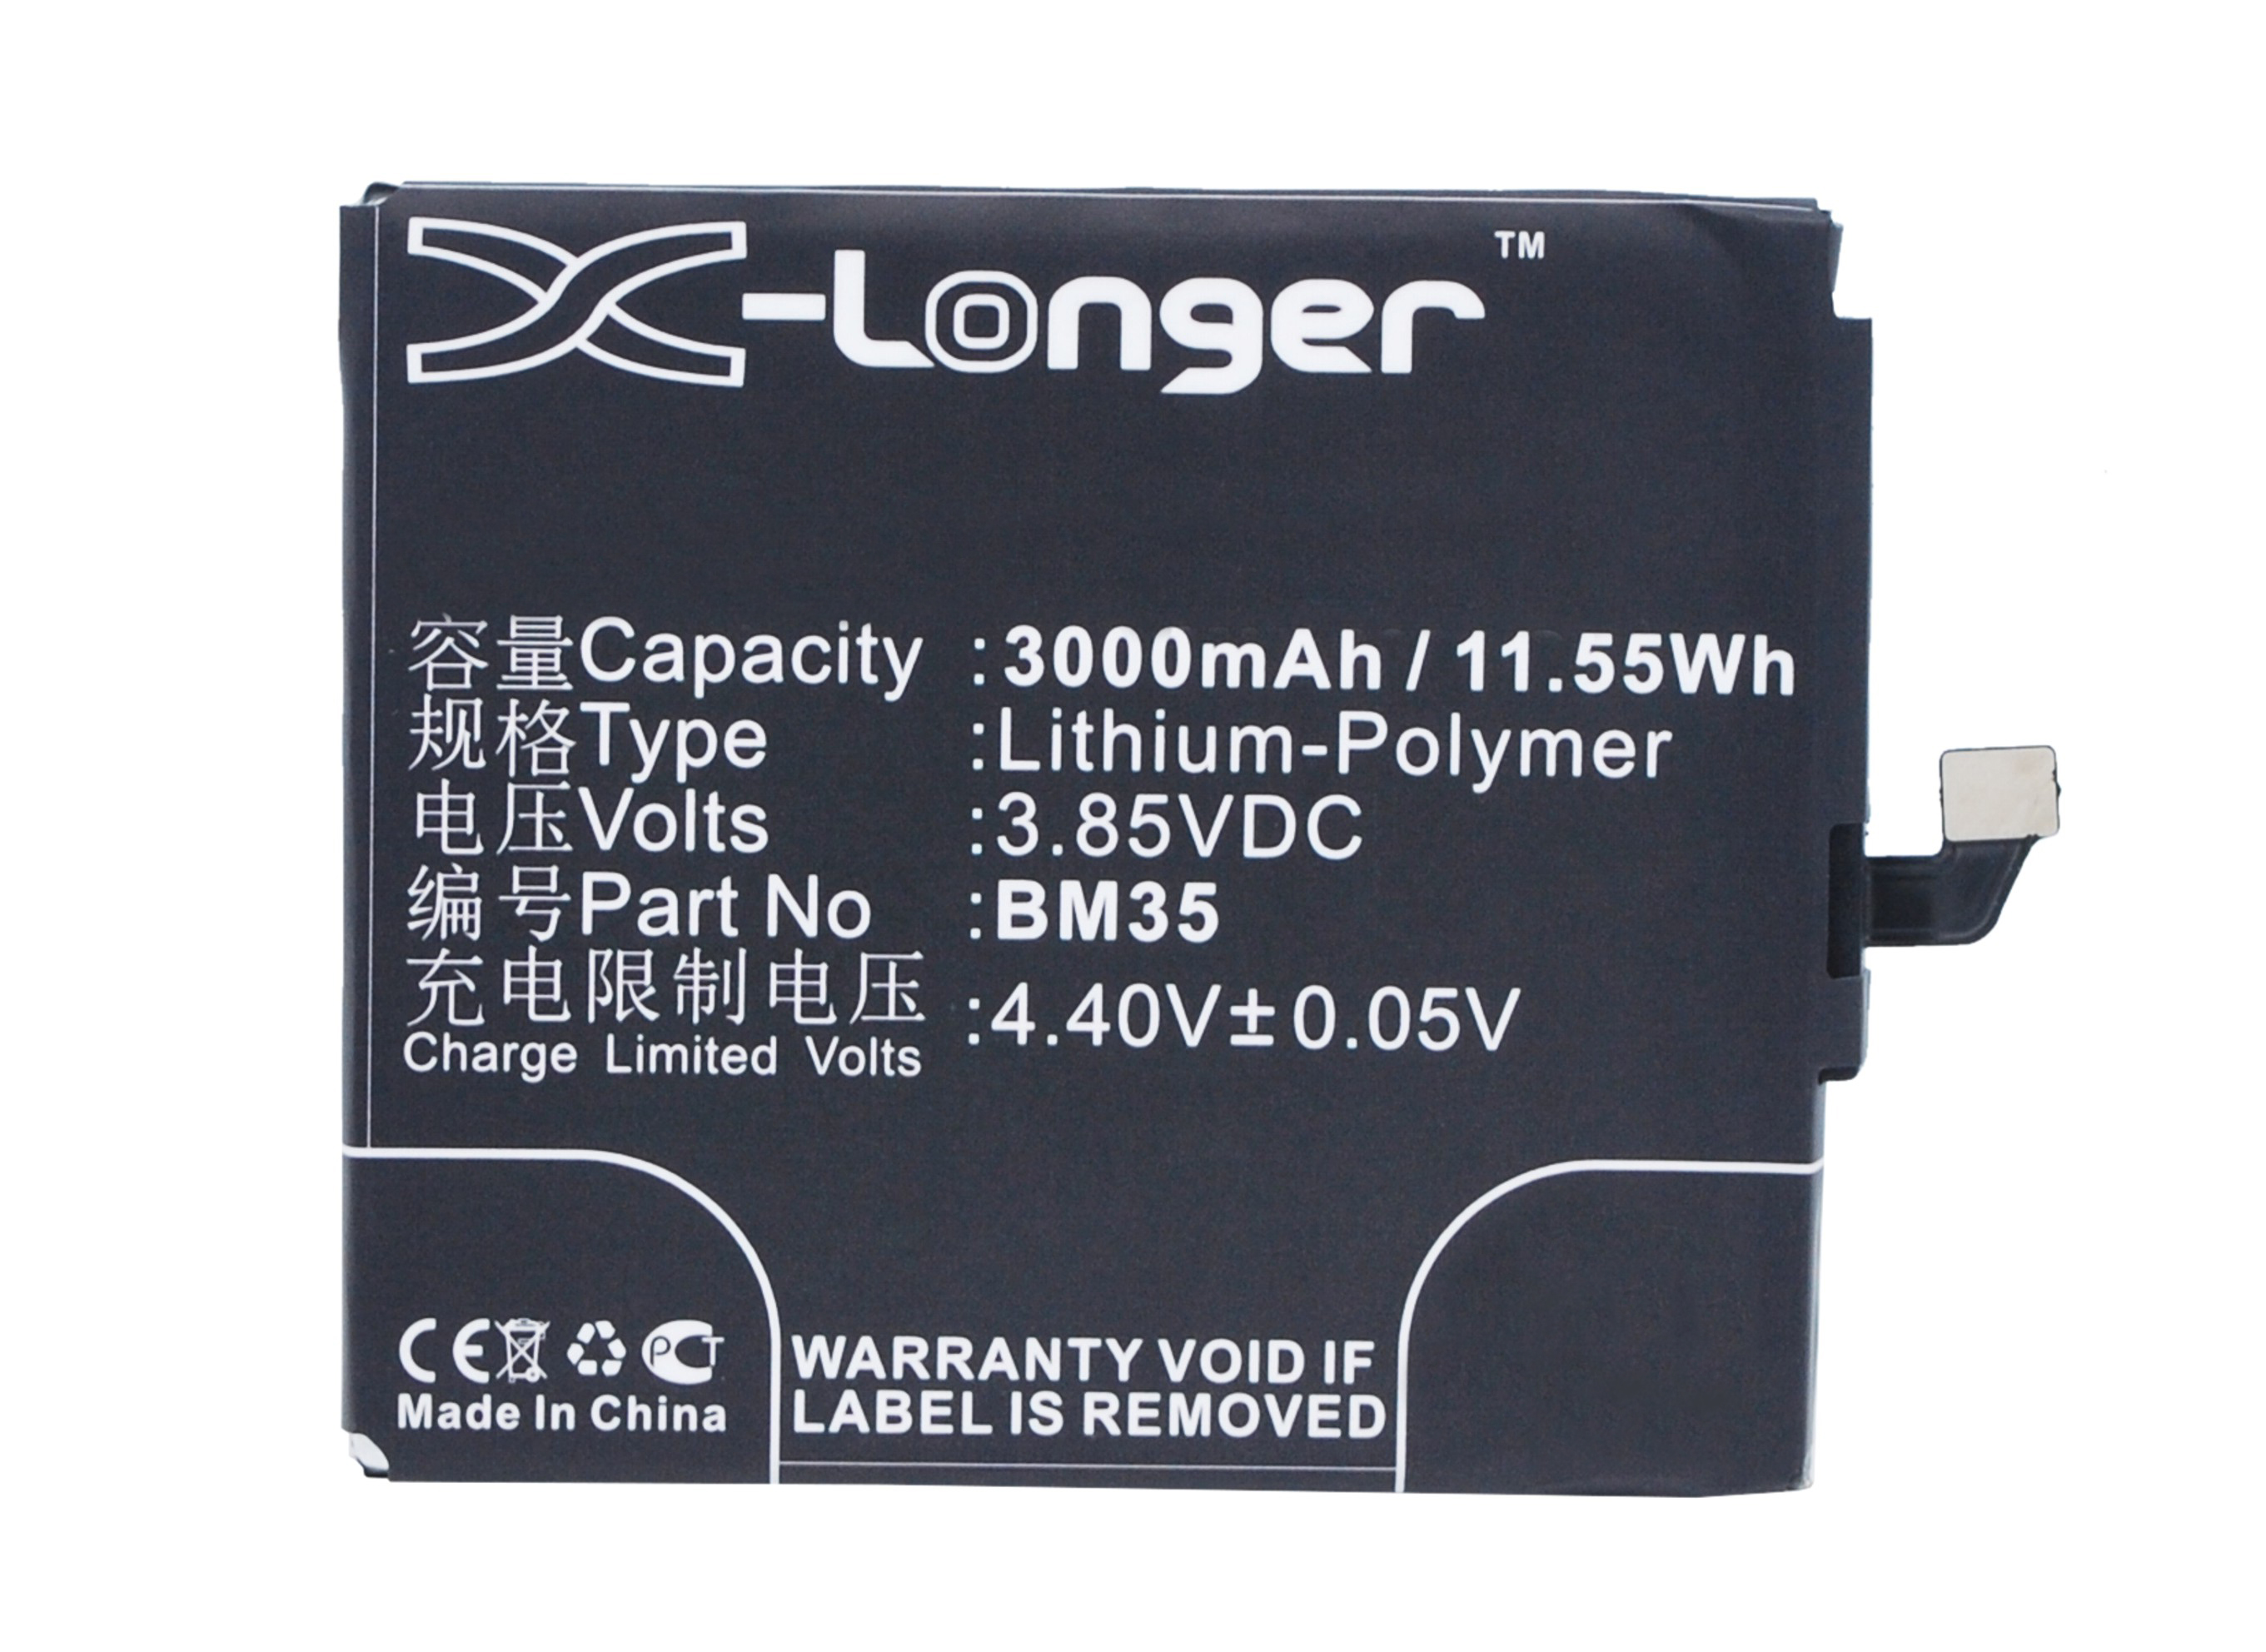 Synergy Digital Battery Compatible With Xiaomi BM35 Cellphone Battery - (Li-Pol, 3.85V, 3000 mAh / 11.55Wh)